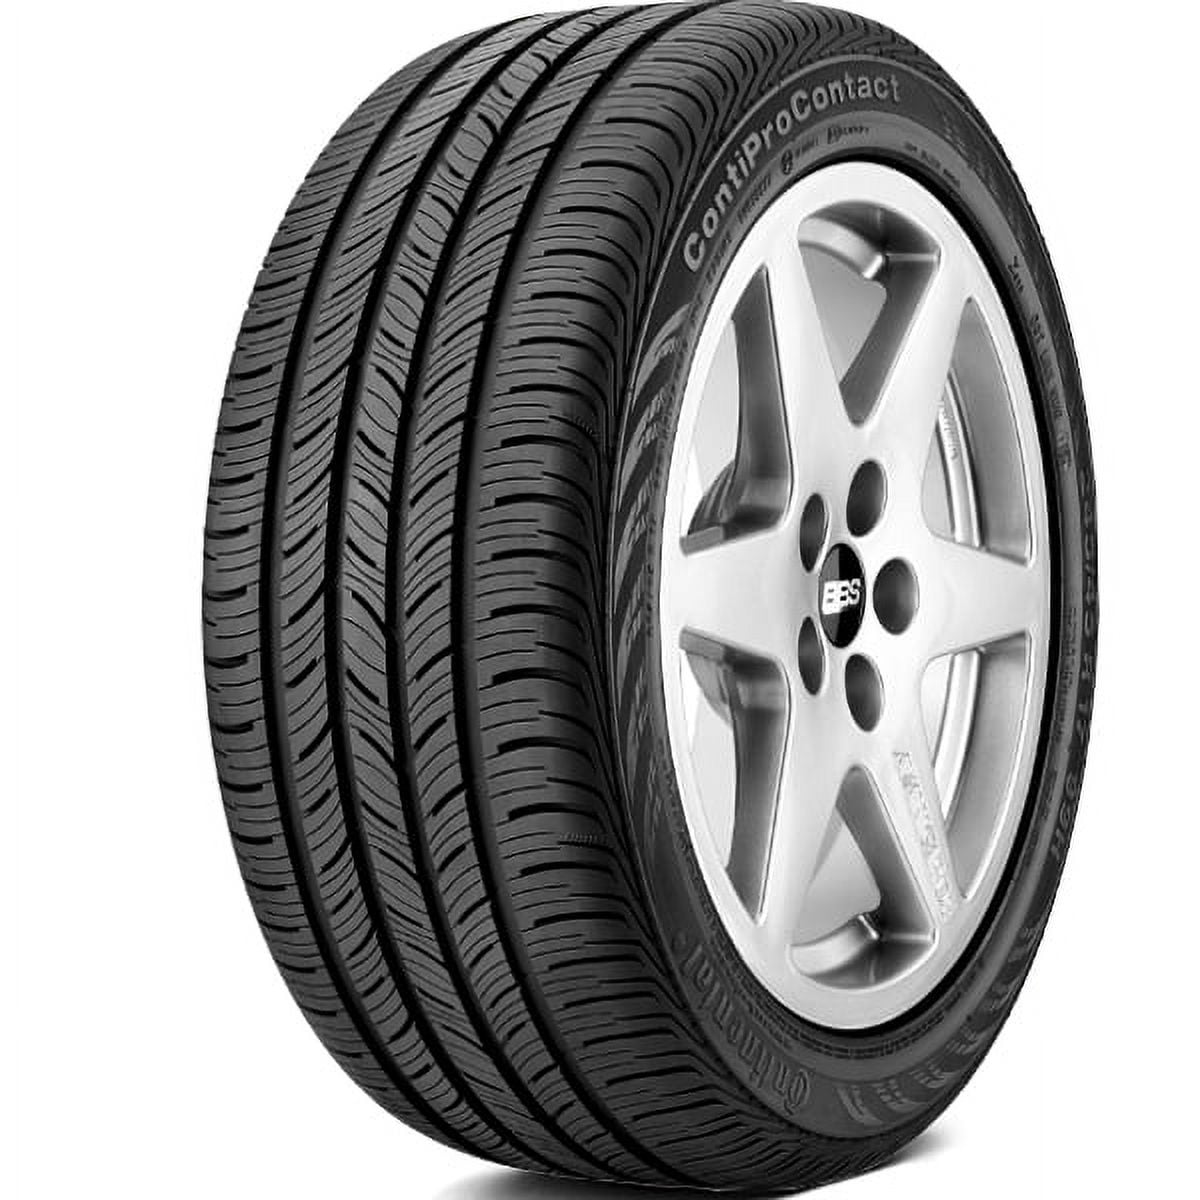 Continental ContiProContact 205/50R17 89V BSW All Season Tire